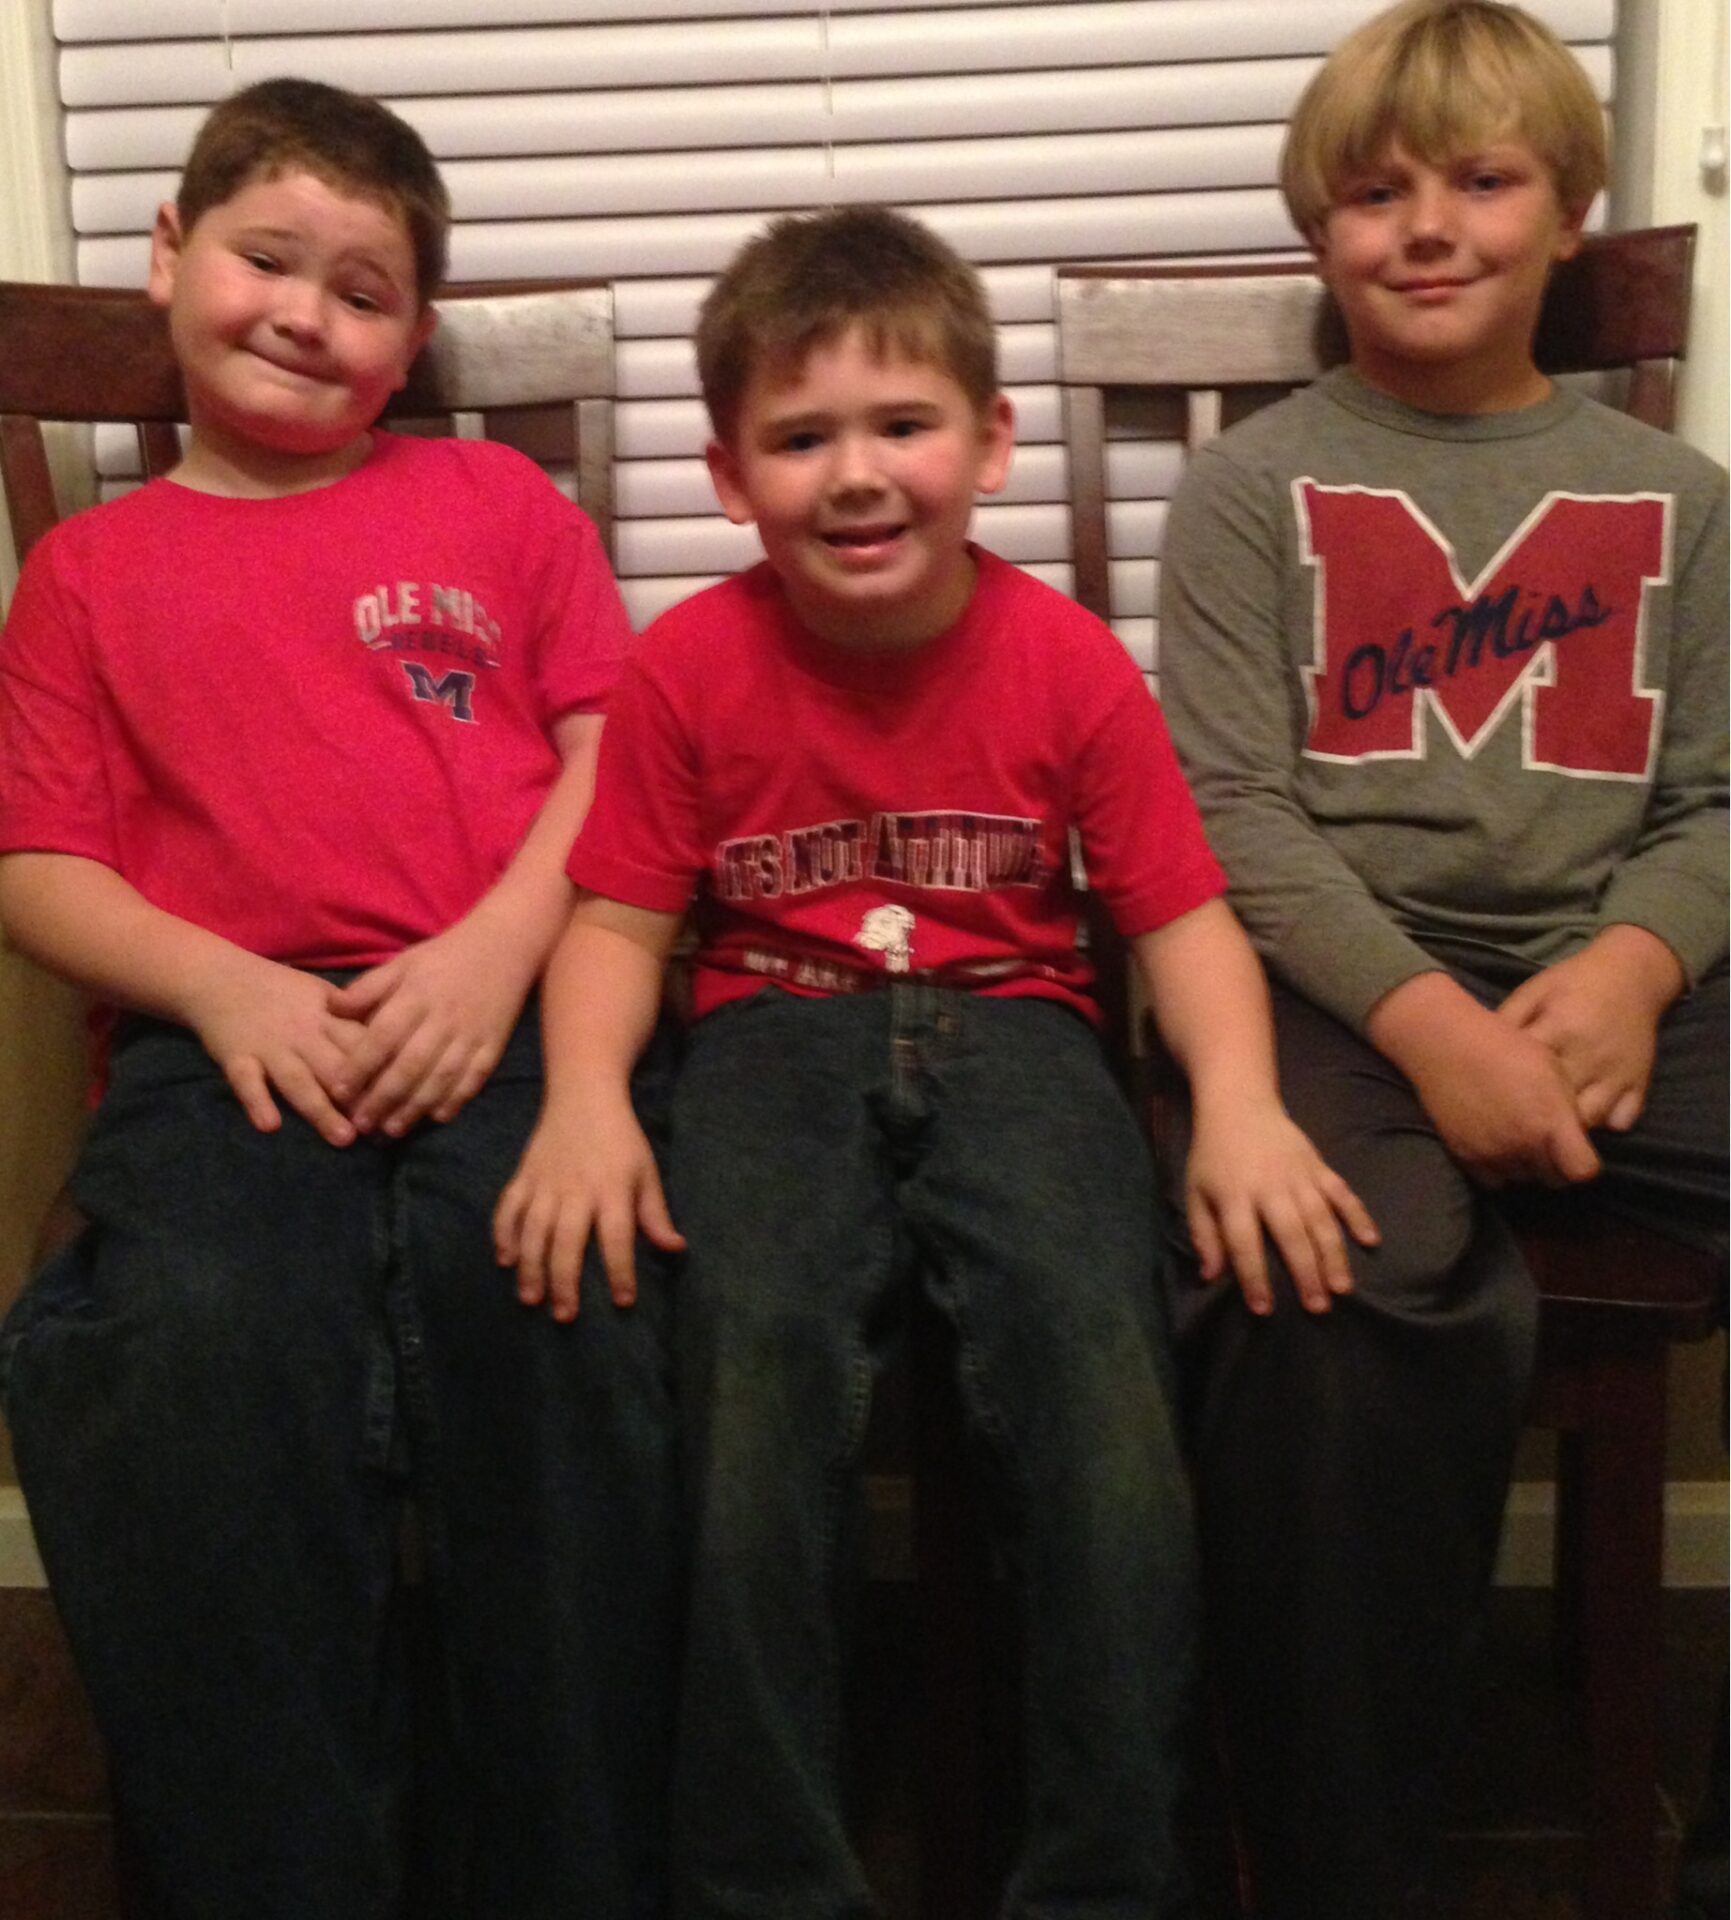 The Williams Kids, left to right, Landon, Duke and Jack